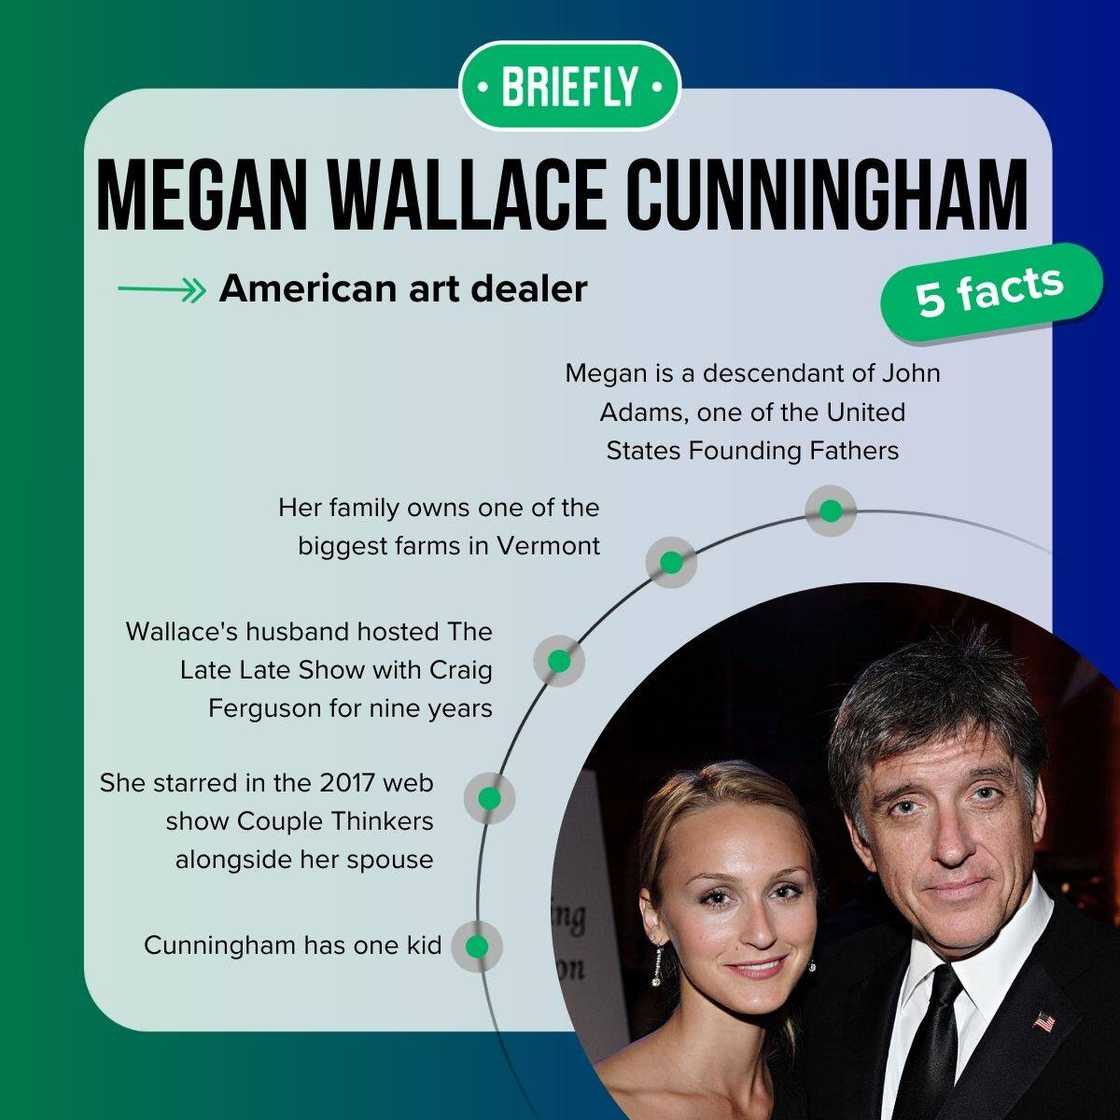 Megan Wallace Cunningham's facts